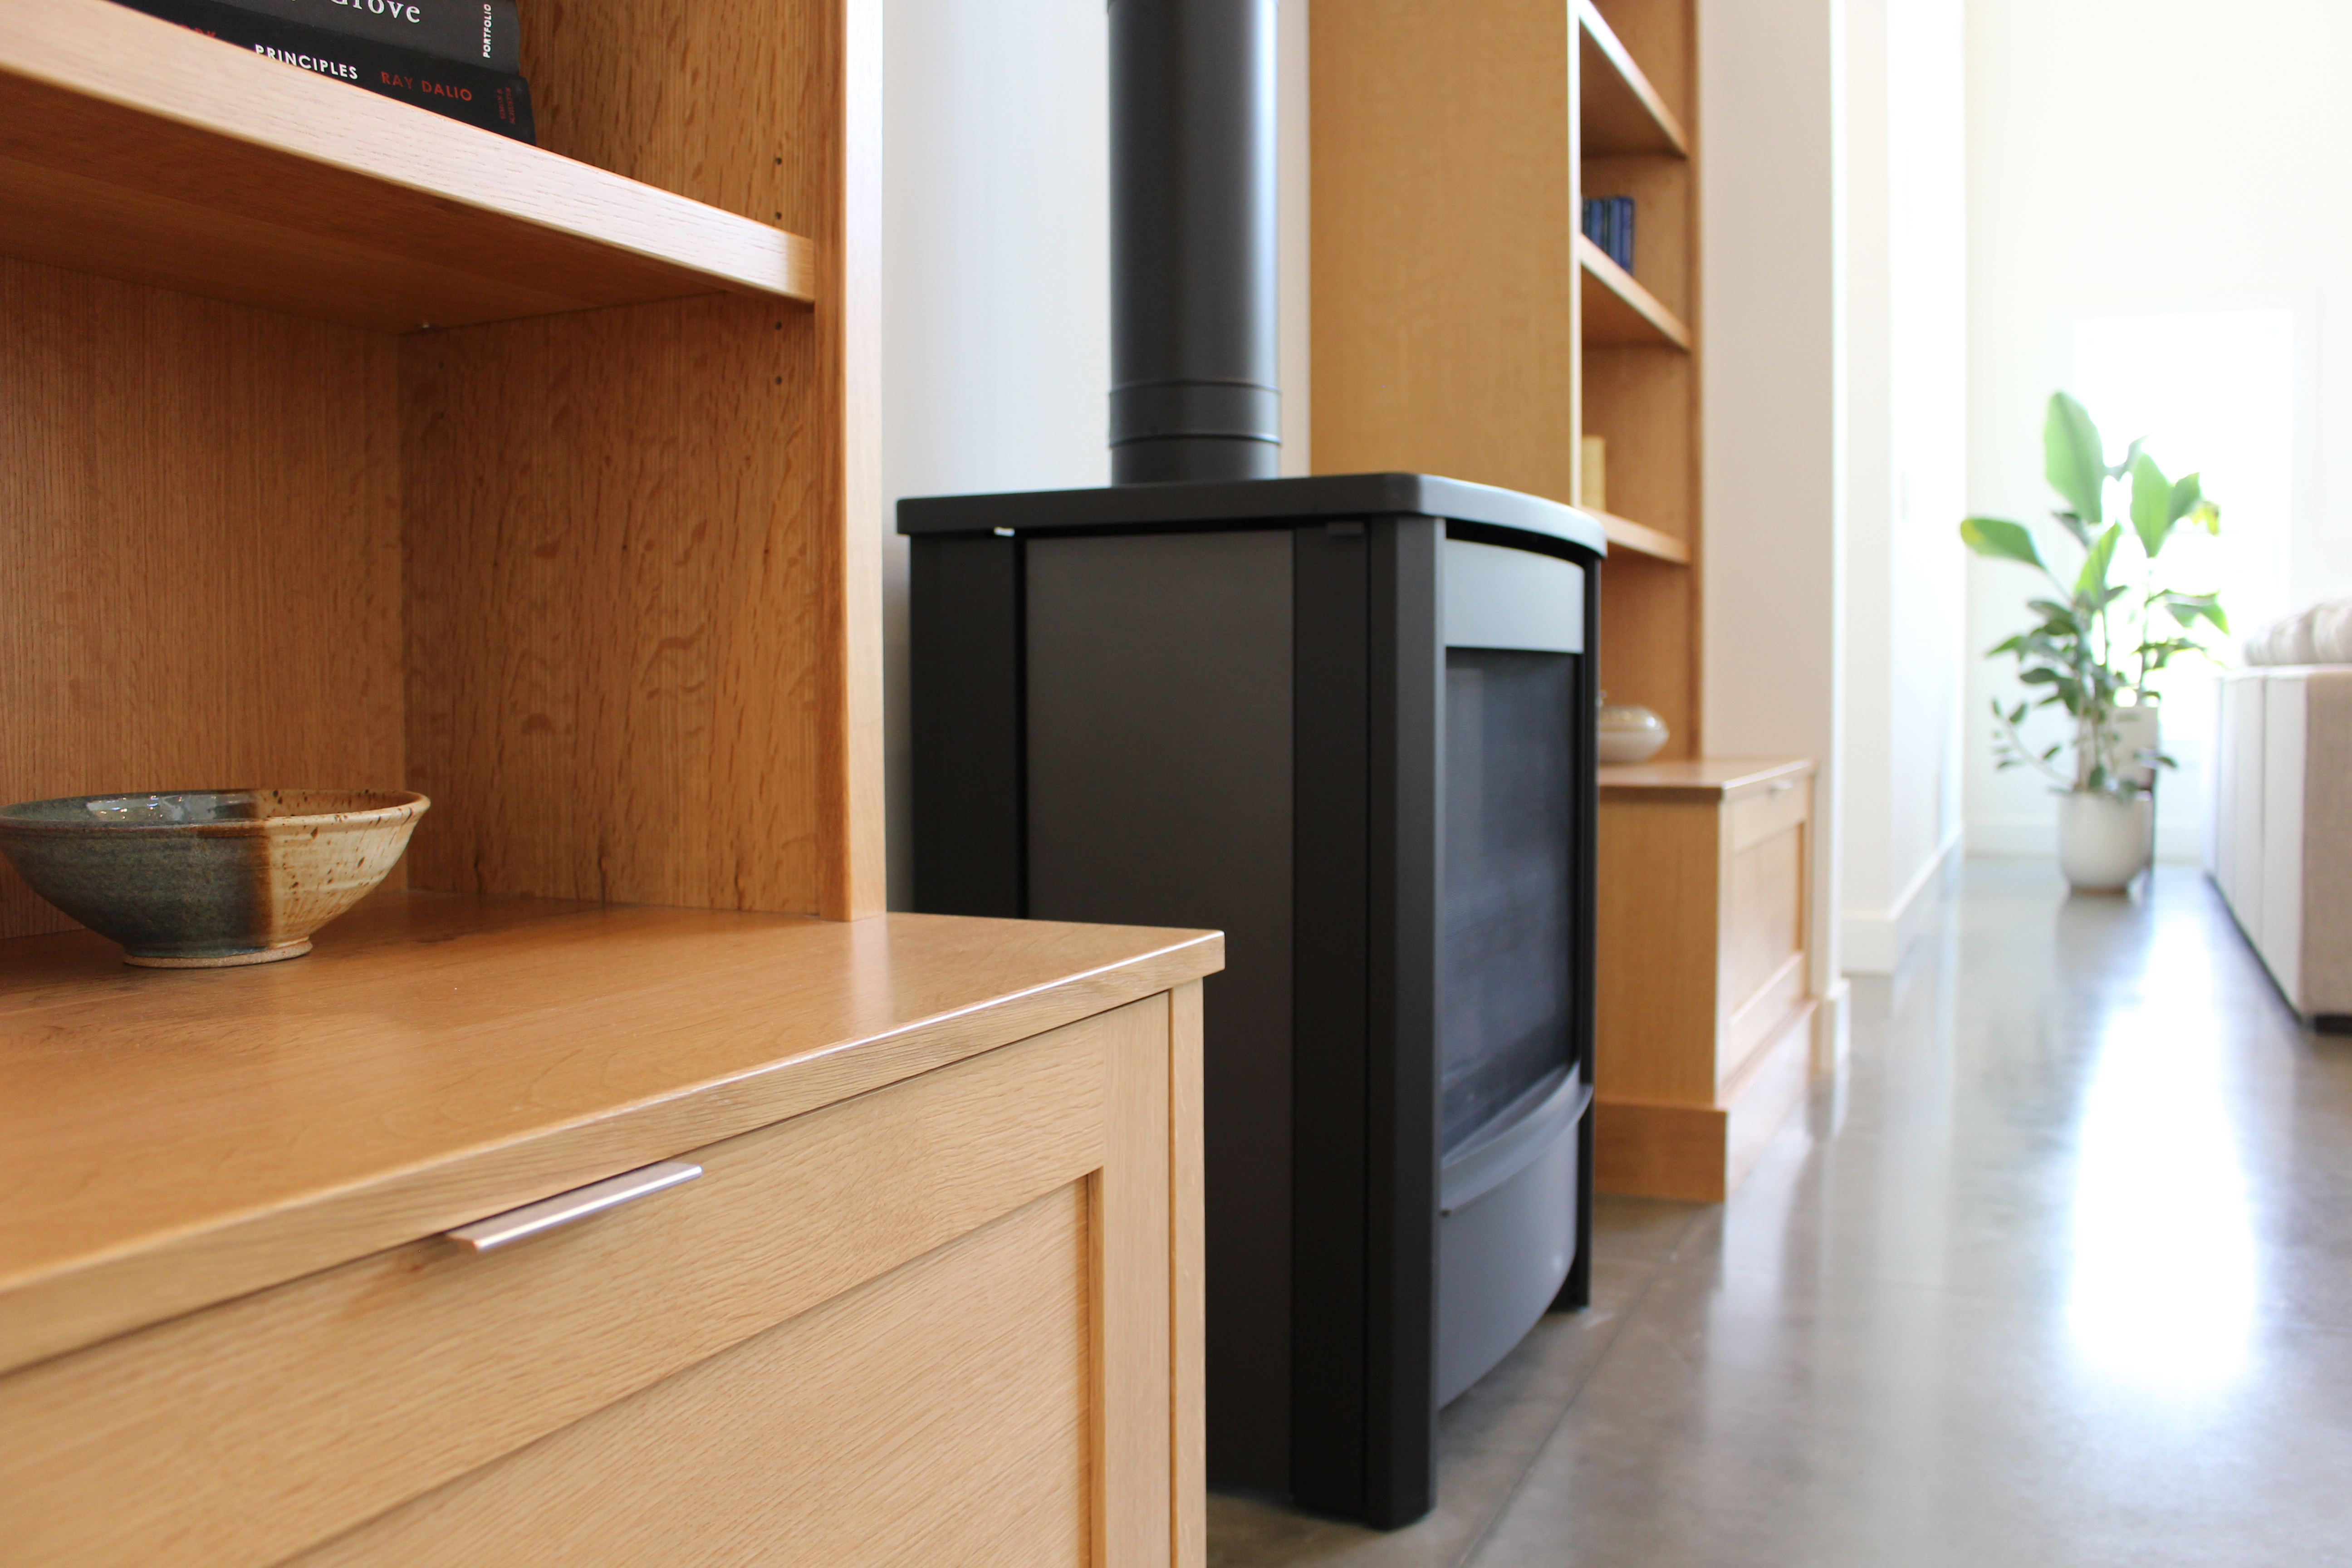 Close up of natural wood builtin cabinets with a black iron, wood burning stove on a polished concrete floor